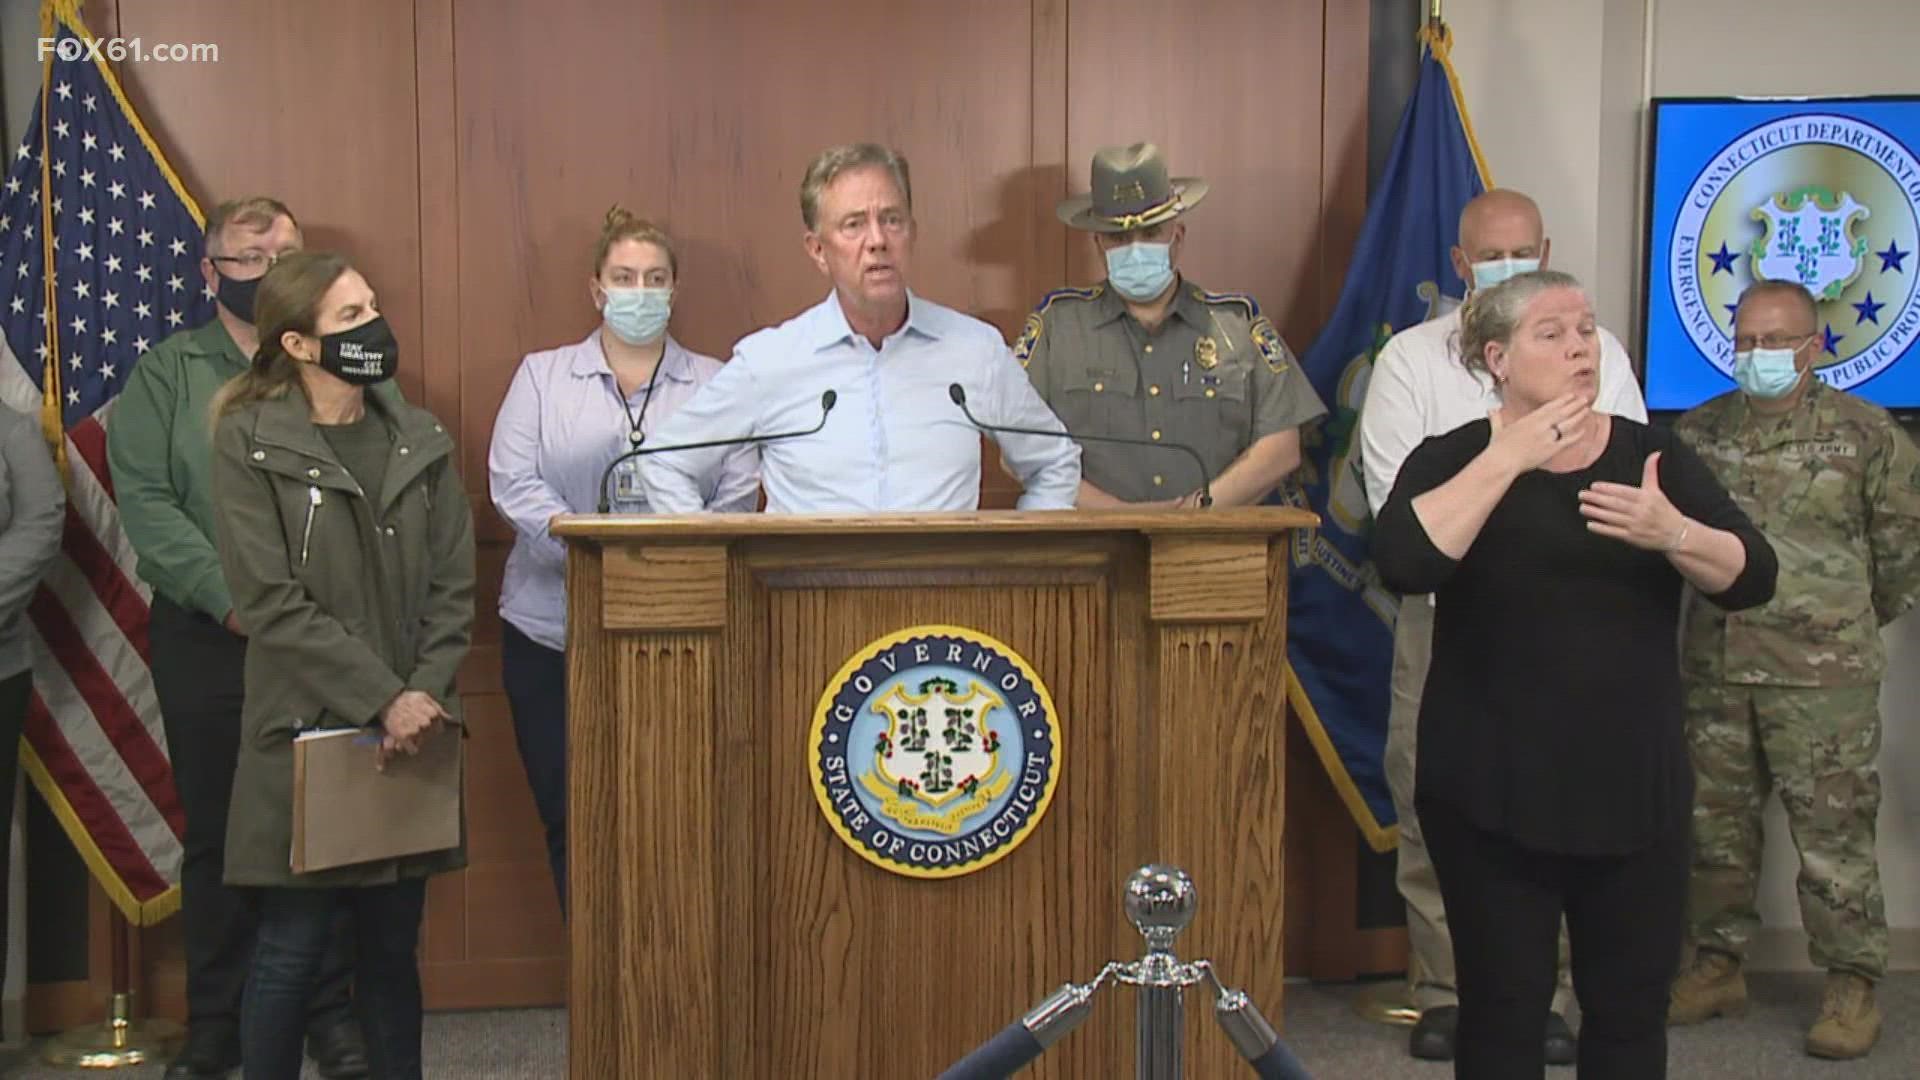 The governor was cautiously optimistic saying he will reassess the status in Connecticut in 24 hours.